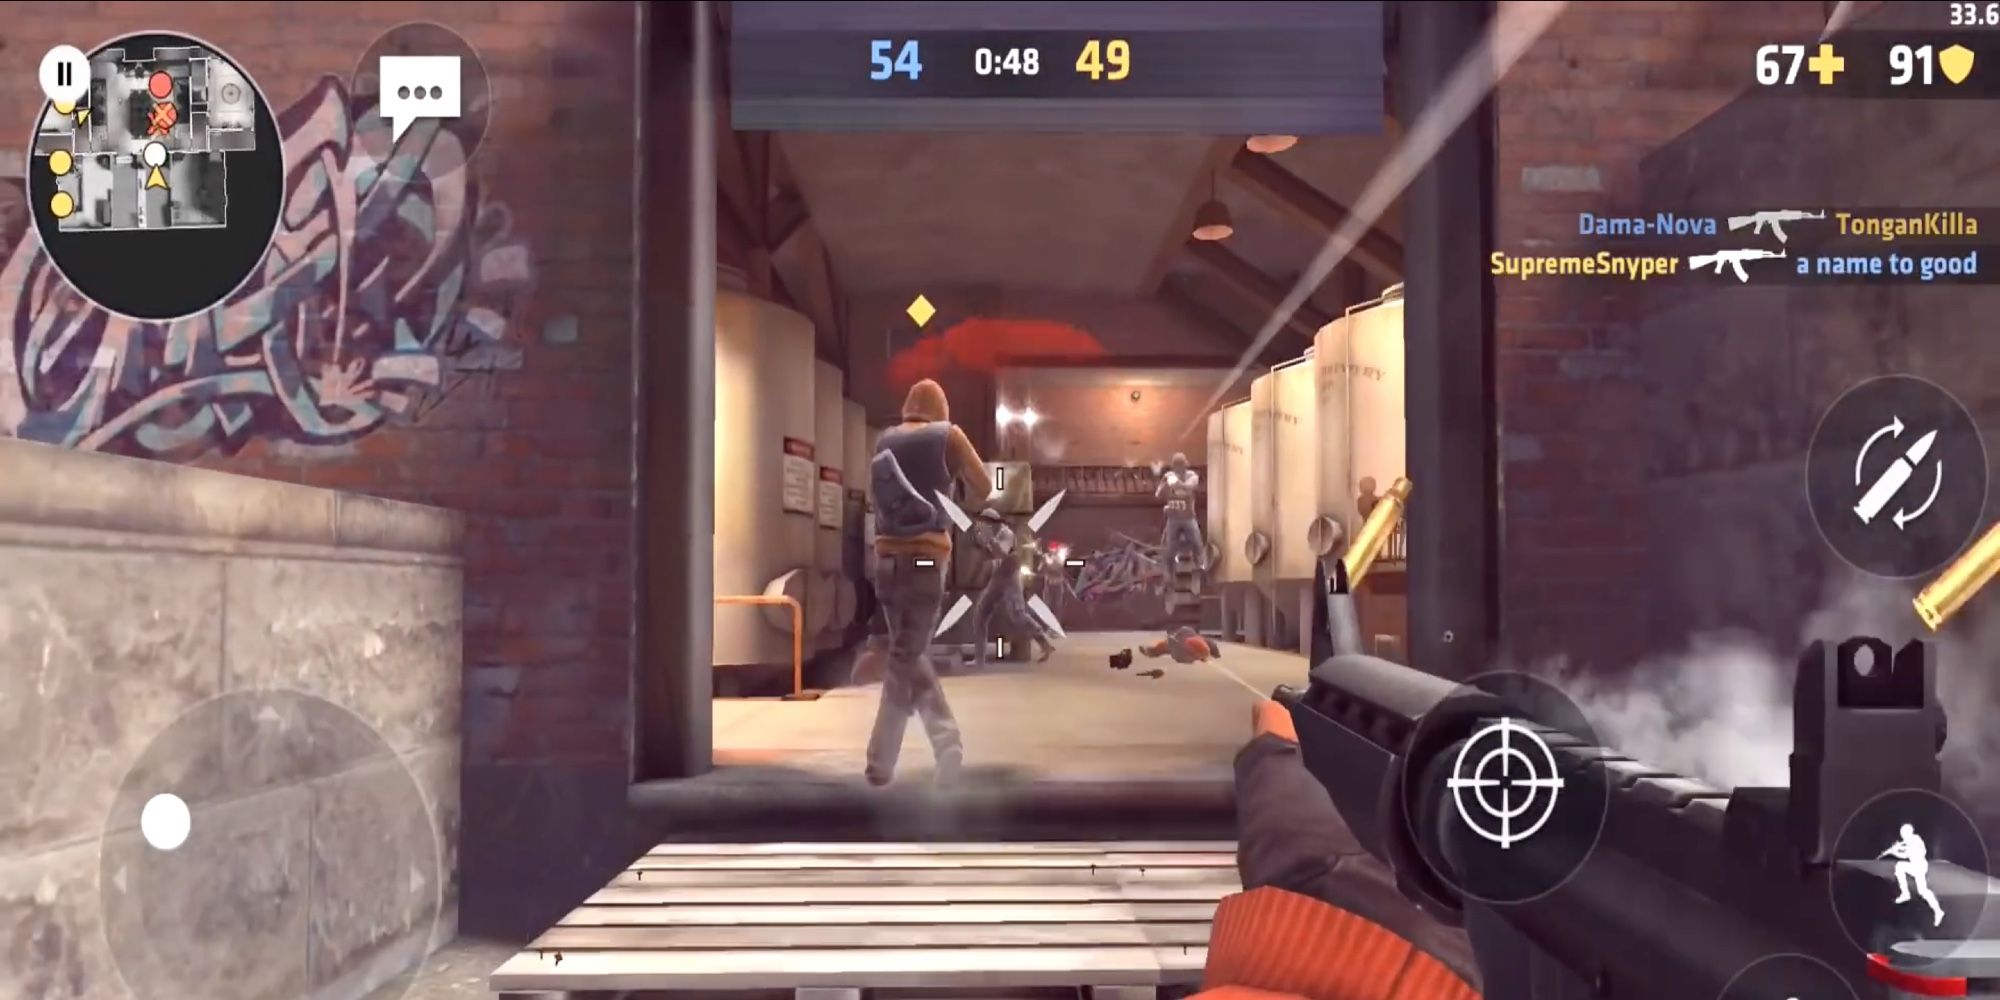 FPS Games on Mobile - Critical Ops - Player covers allies 